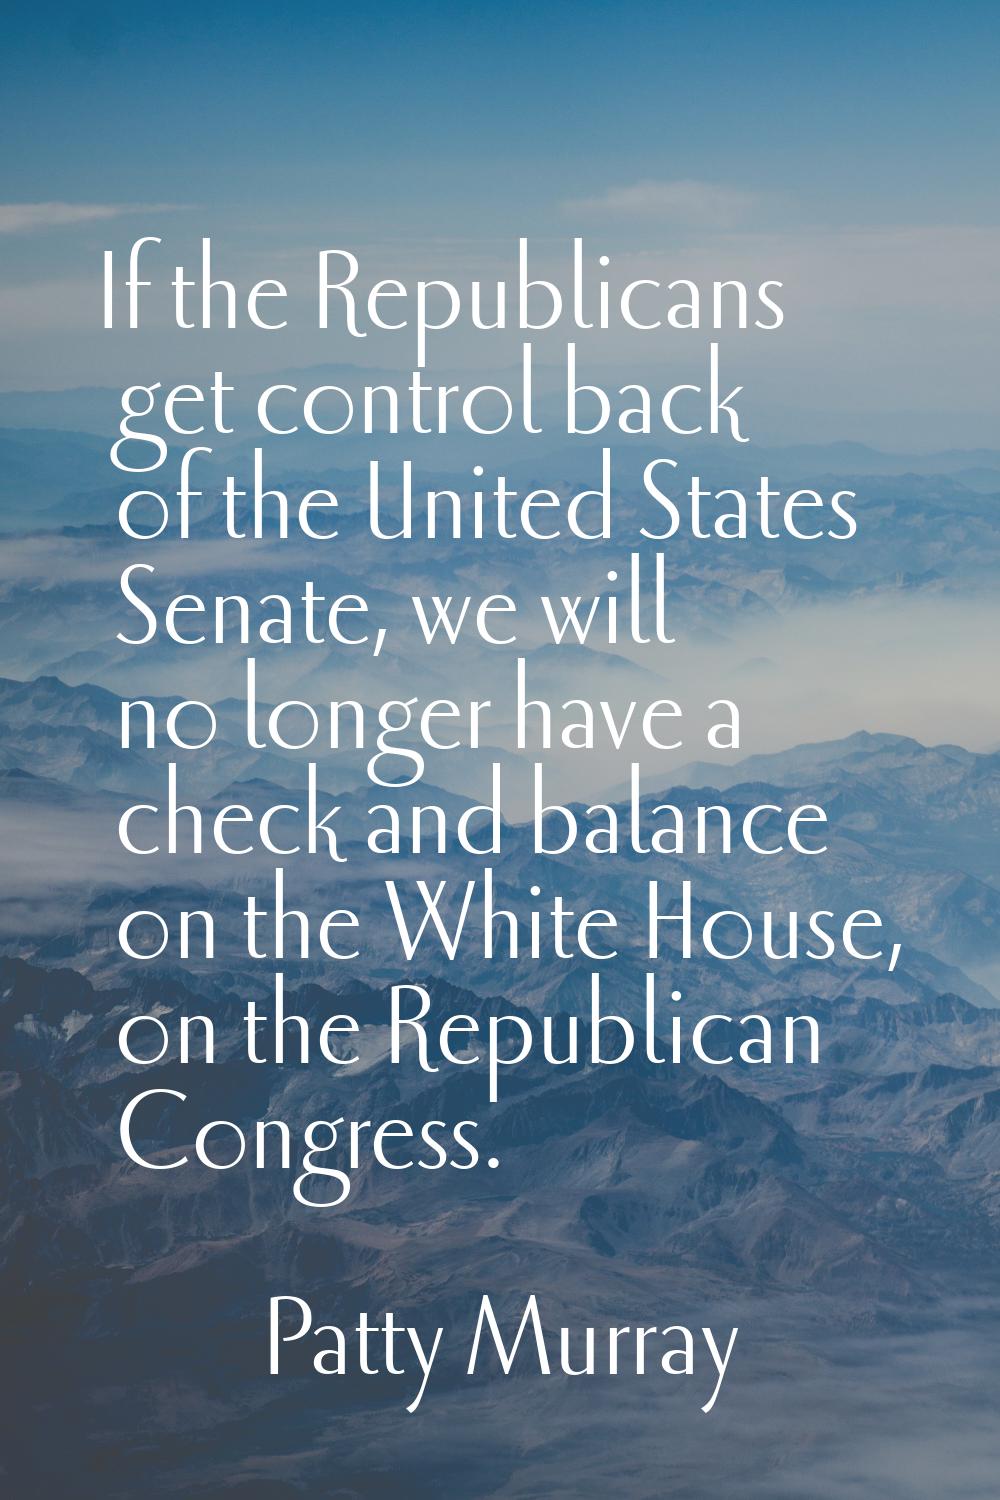 If the Republicans get control back of the United States Senate, we will no longer have a check and